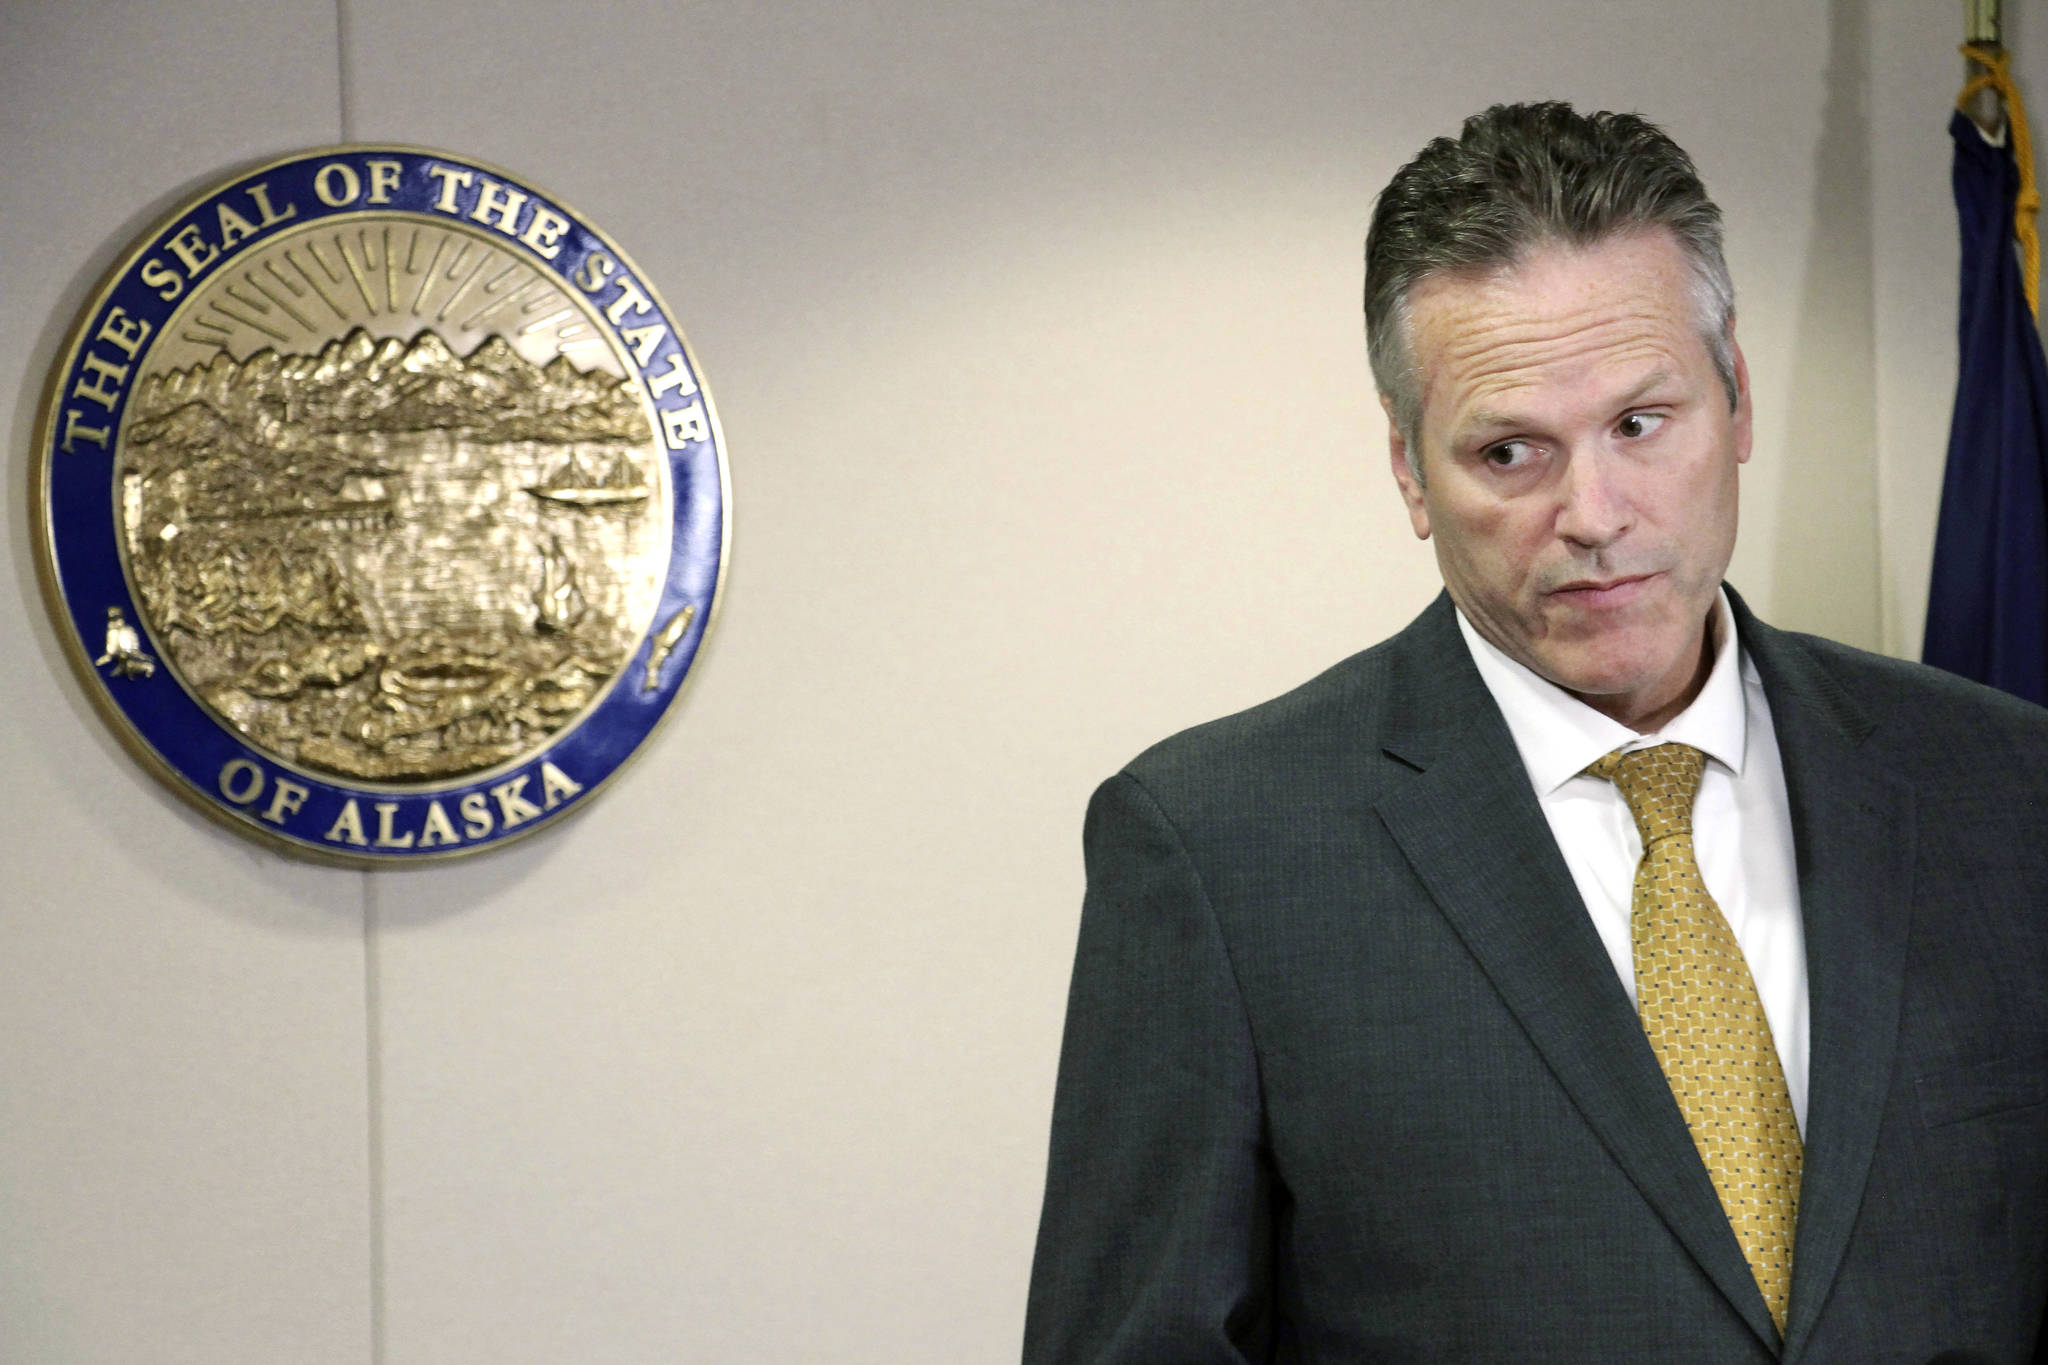 In this Sept. 26, 2019 file photo, Alaska Gov. Mike Dunleavy listens during a news conference in Anchorage, Alaska. The Alaska Supreme Court ruled Friday, May 8, 2020, that an effort to recall Dunleavy can proceed. (AP Photo | Mark Thiessen, File)